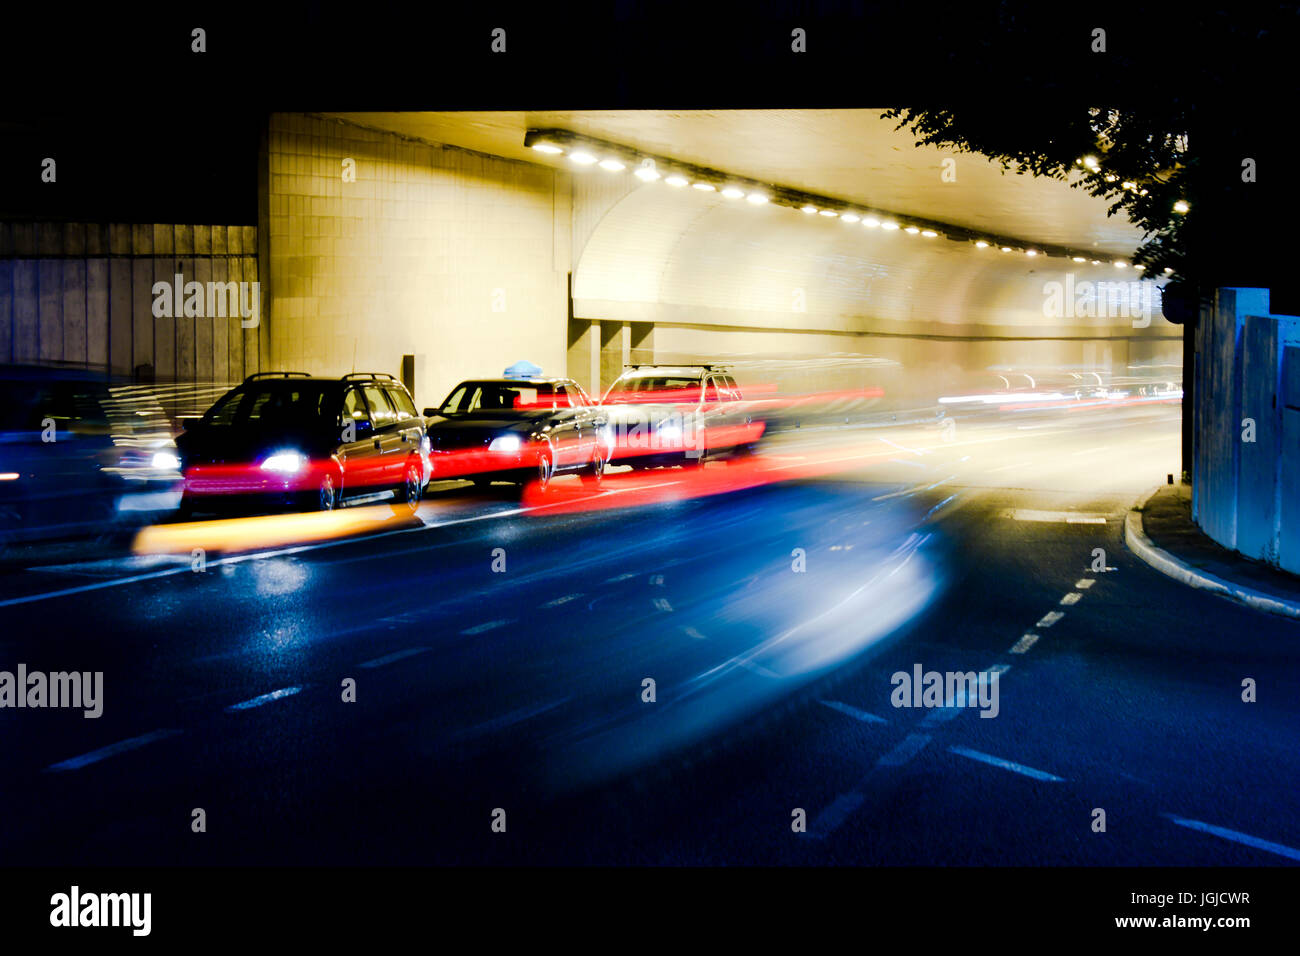 Night traffic on city streets.Cars at tunnel exit waiting at intersection while driving vehicles entering tunnel leaving colored light trails Stock Photo